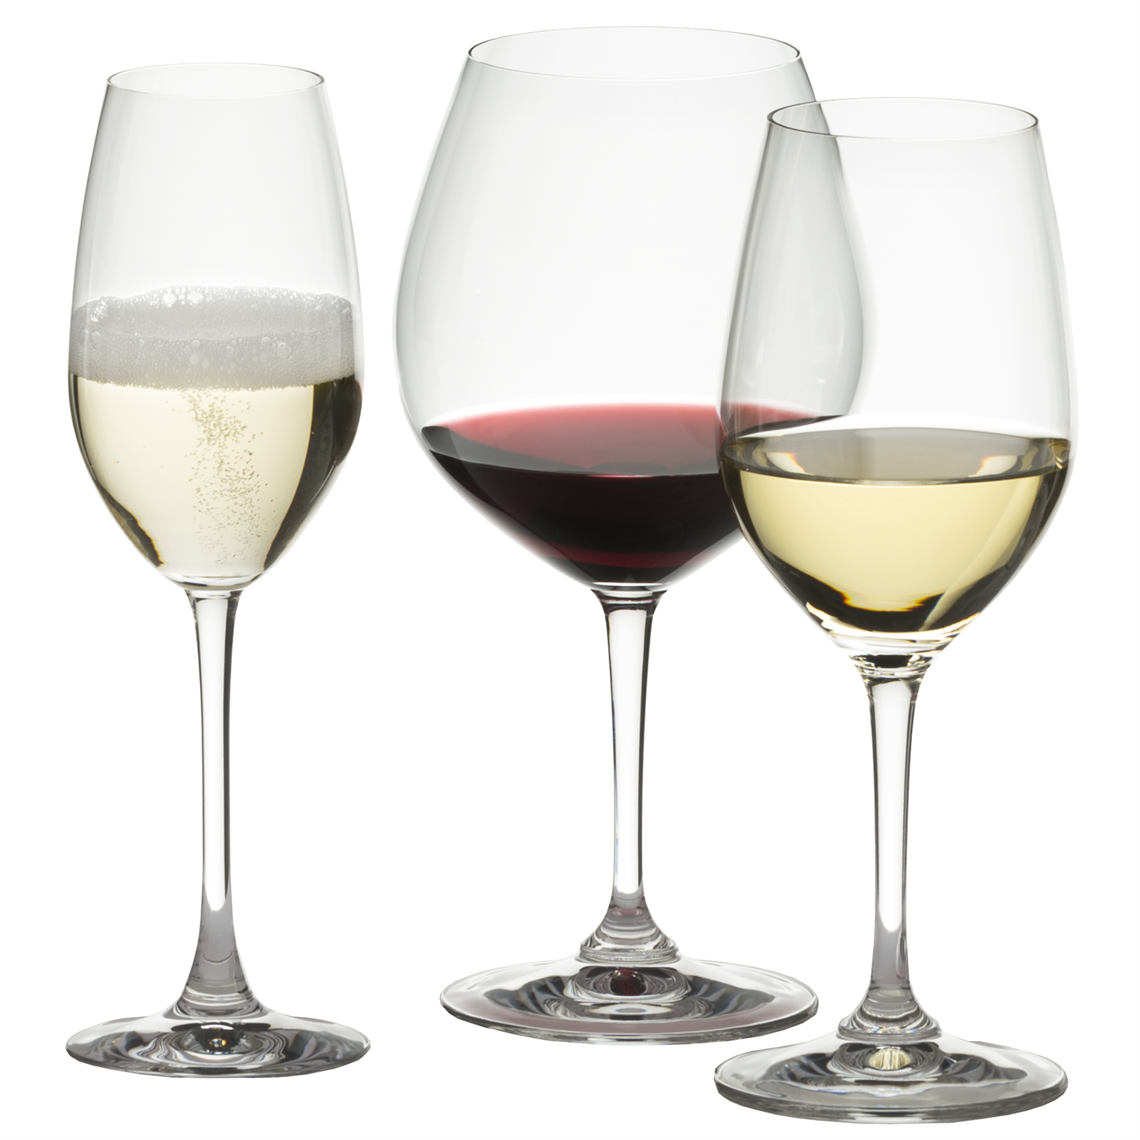 View more fortissimo from our Restaurant & Trade Glasses range